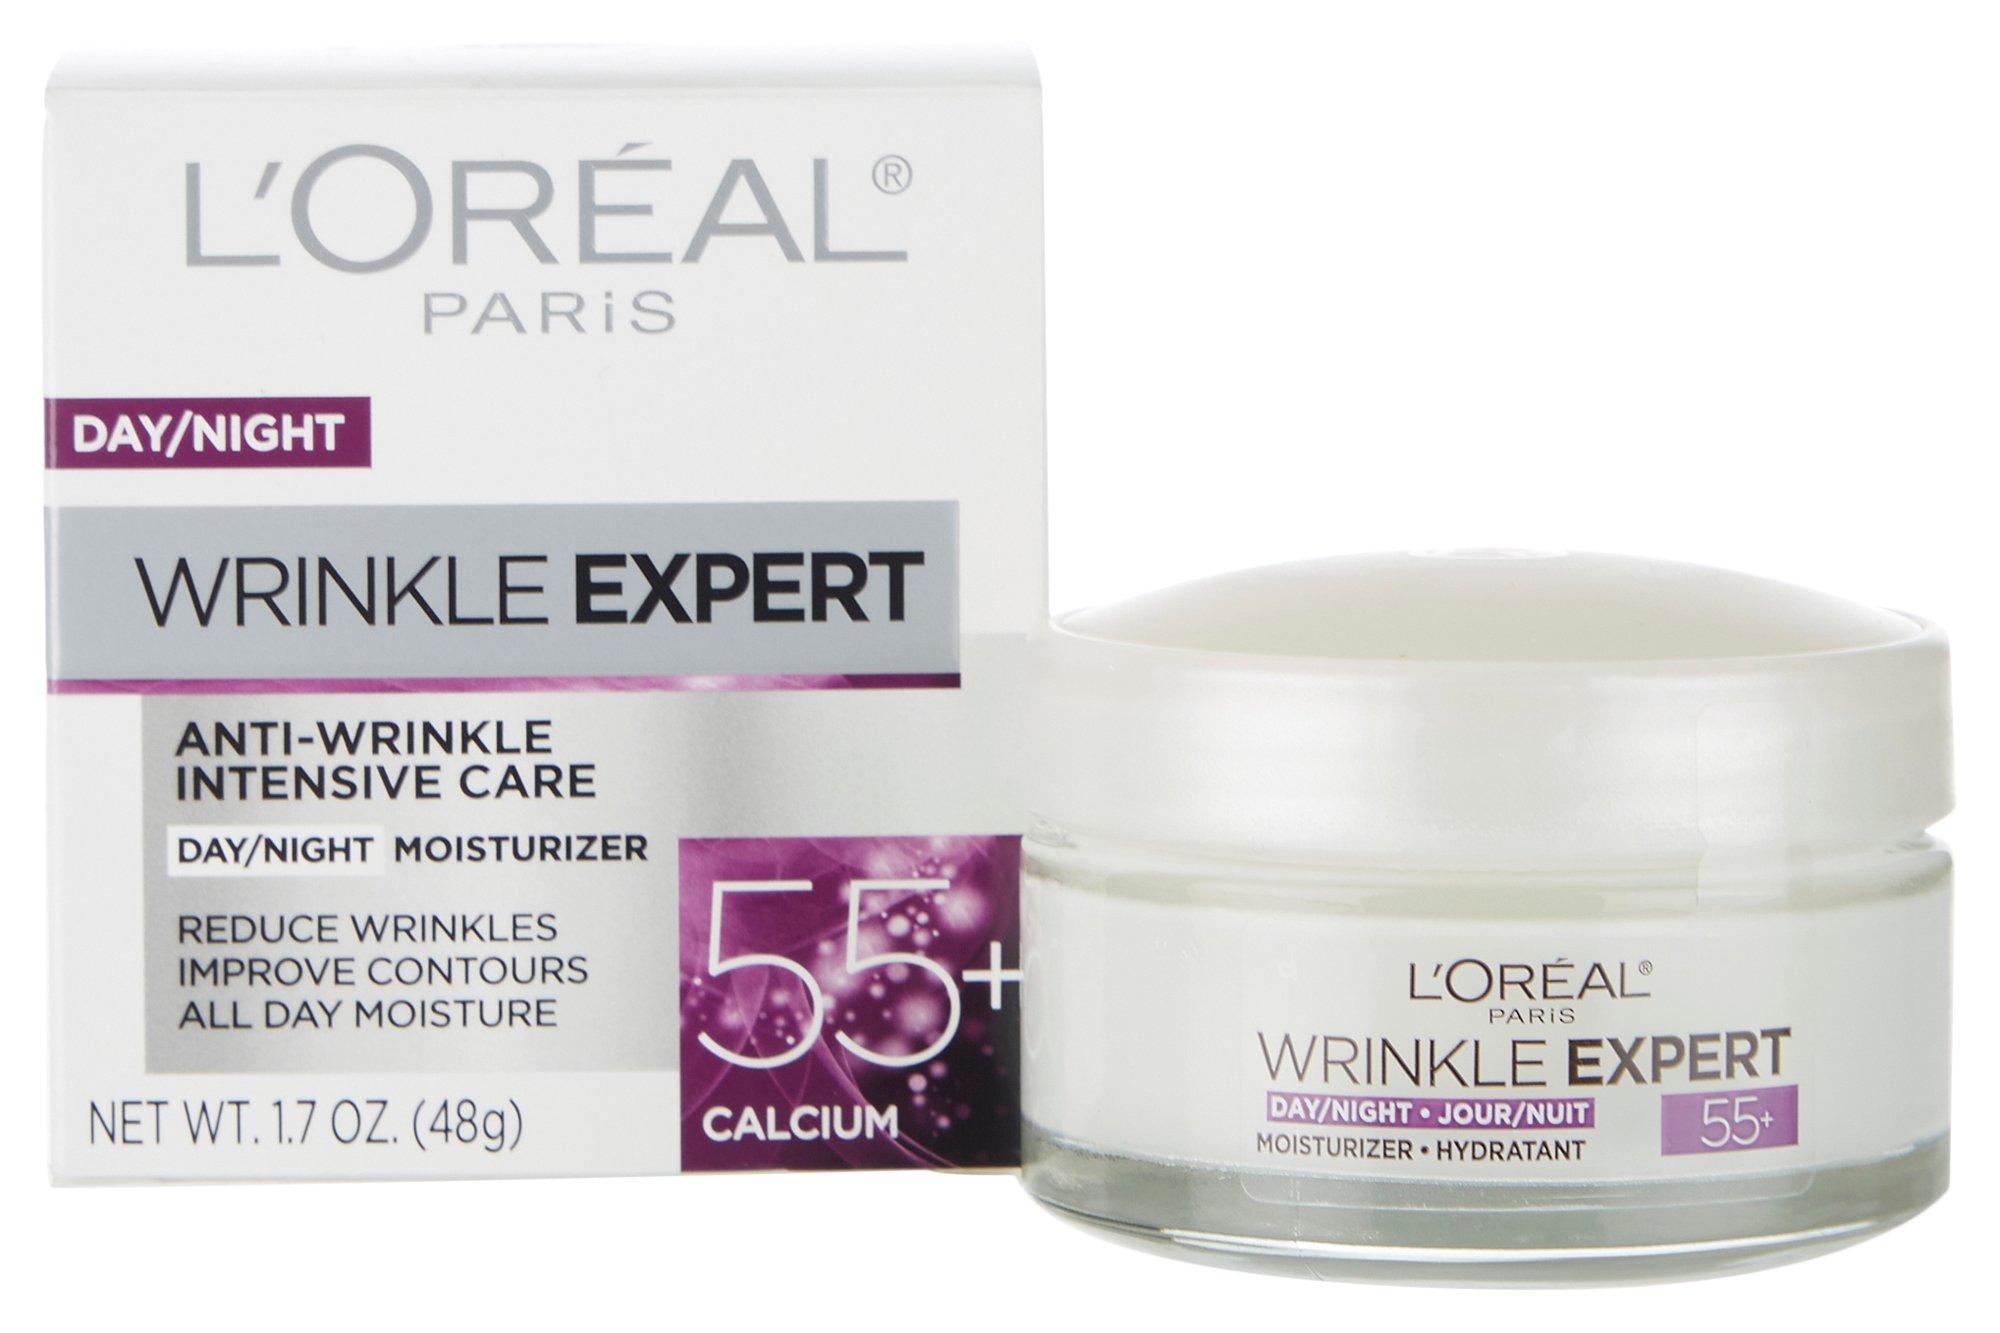 Day Night Wrinkle Expert Intensive Care Moisturizer